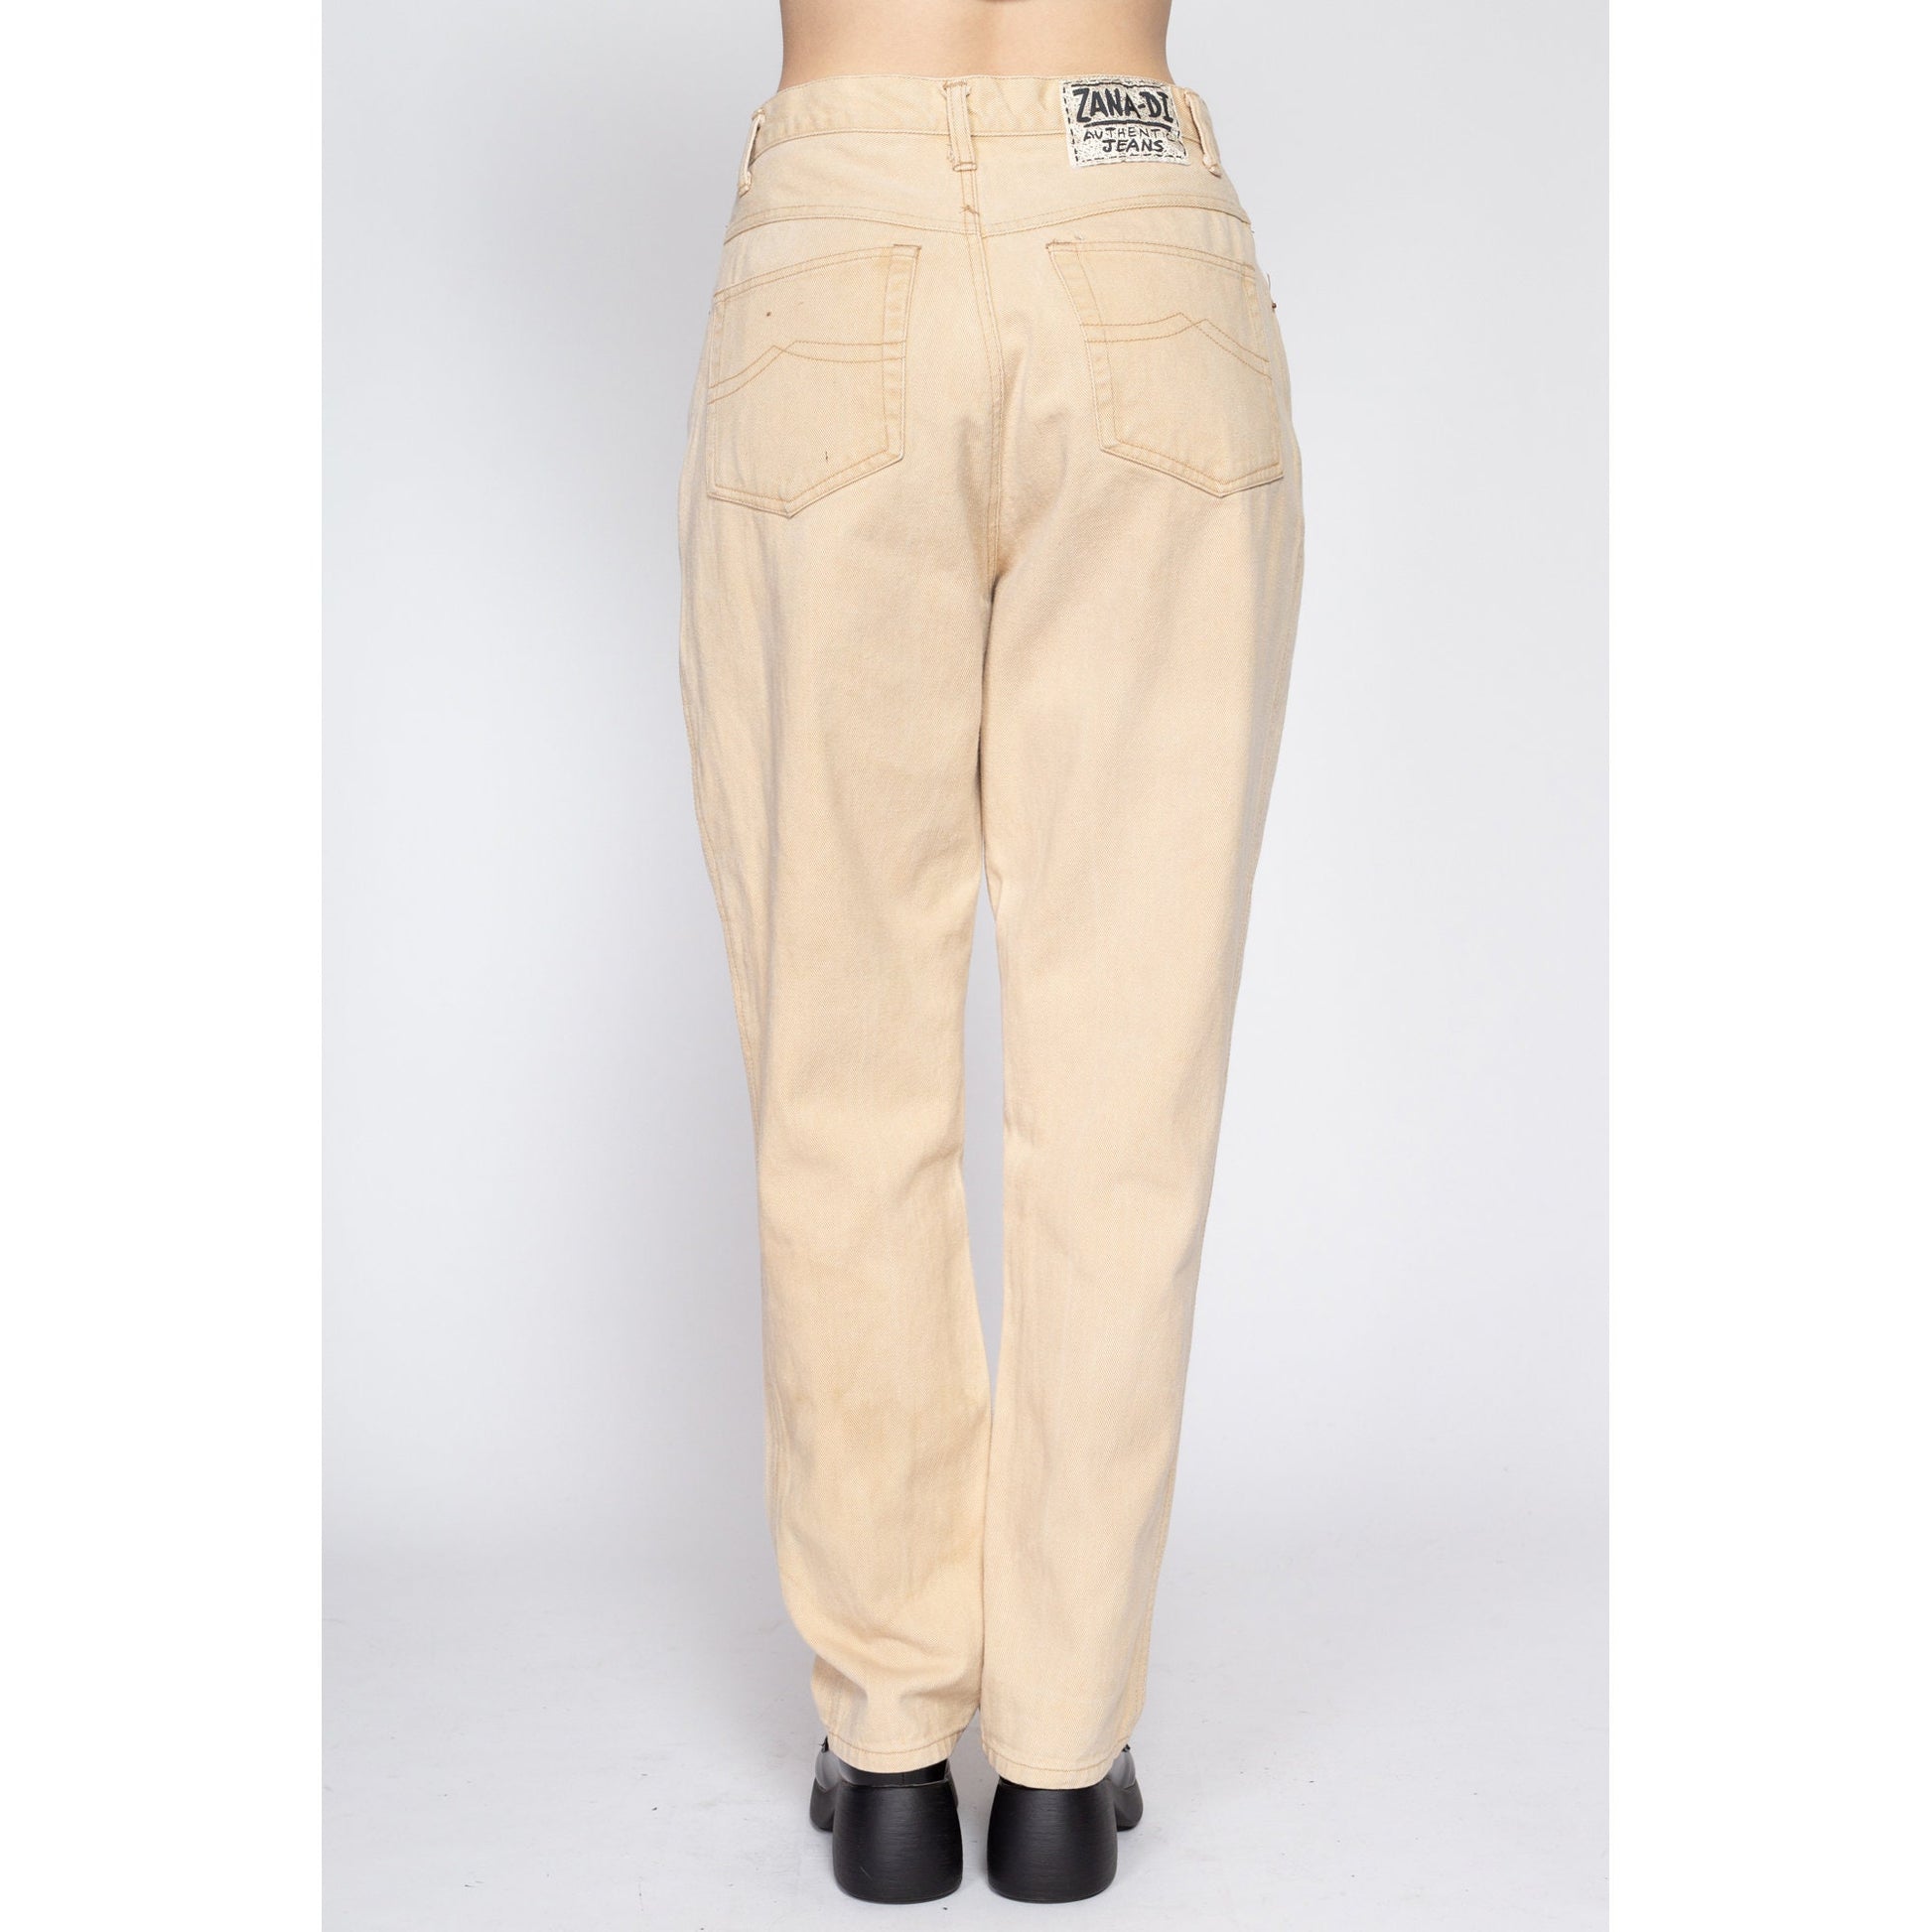 80s Butter Yellow High Waisted Trousers - Medium, 27.5 – Flying Apple  Vintage